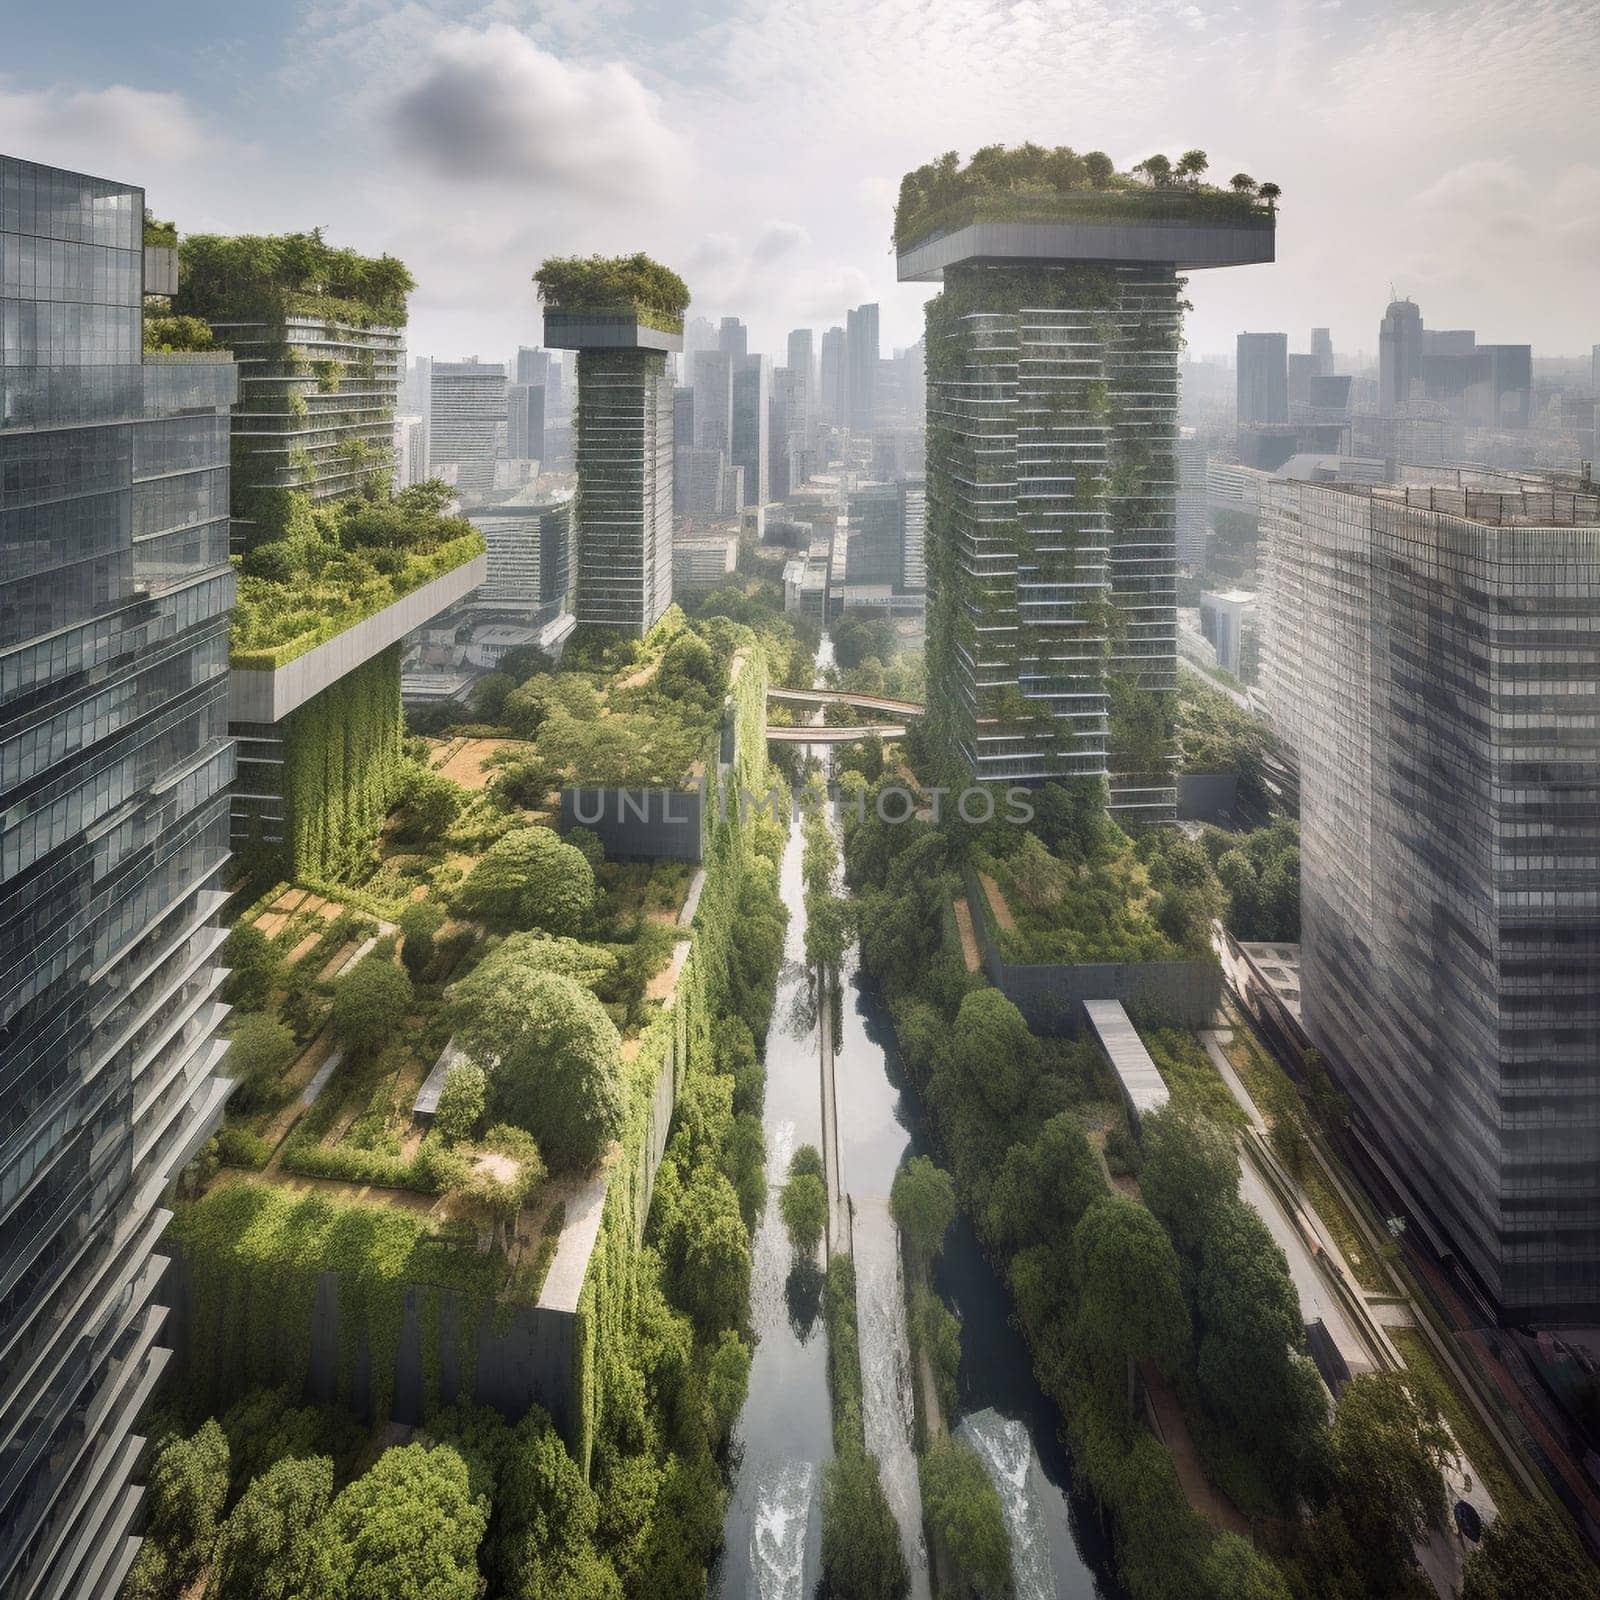 This image depicts a bustling city with green rooftops, lush vertical gardens, and a river flowing through the heart of the metropolis. It showcases the importance of water conservation and sustainable urban planning. The green roofs and vertical gardens help reduce heat and carbon emissions, improve air quality, and provide habitats for urban wildlife. The river serves as a natural ecosystem and provides the city with a reliable source of water for various needs. This image represents a sustainable future for cities around the world.